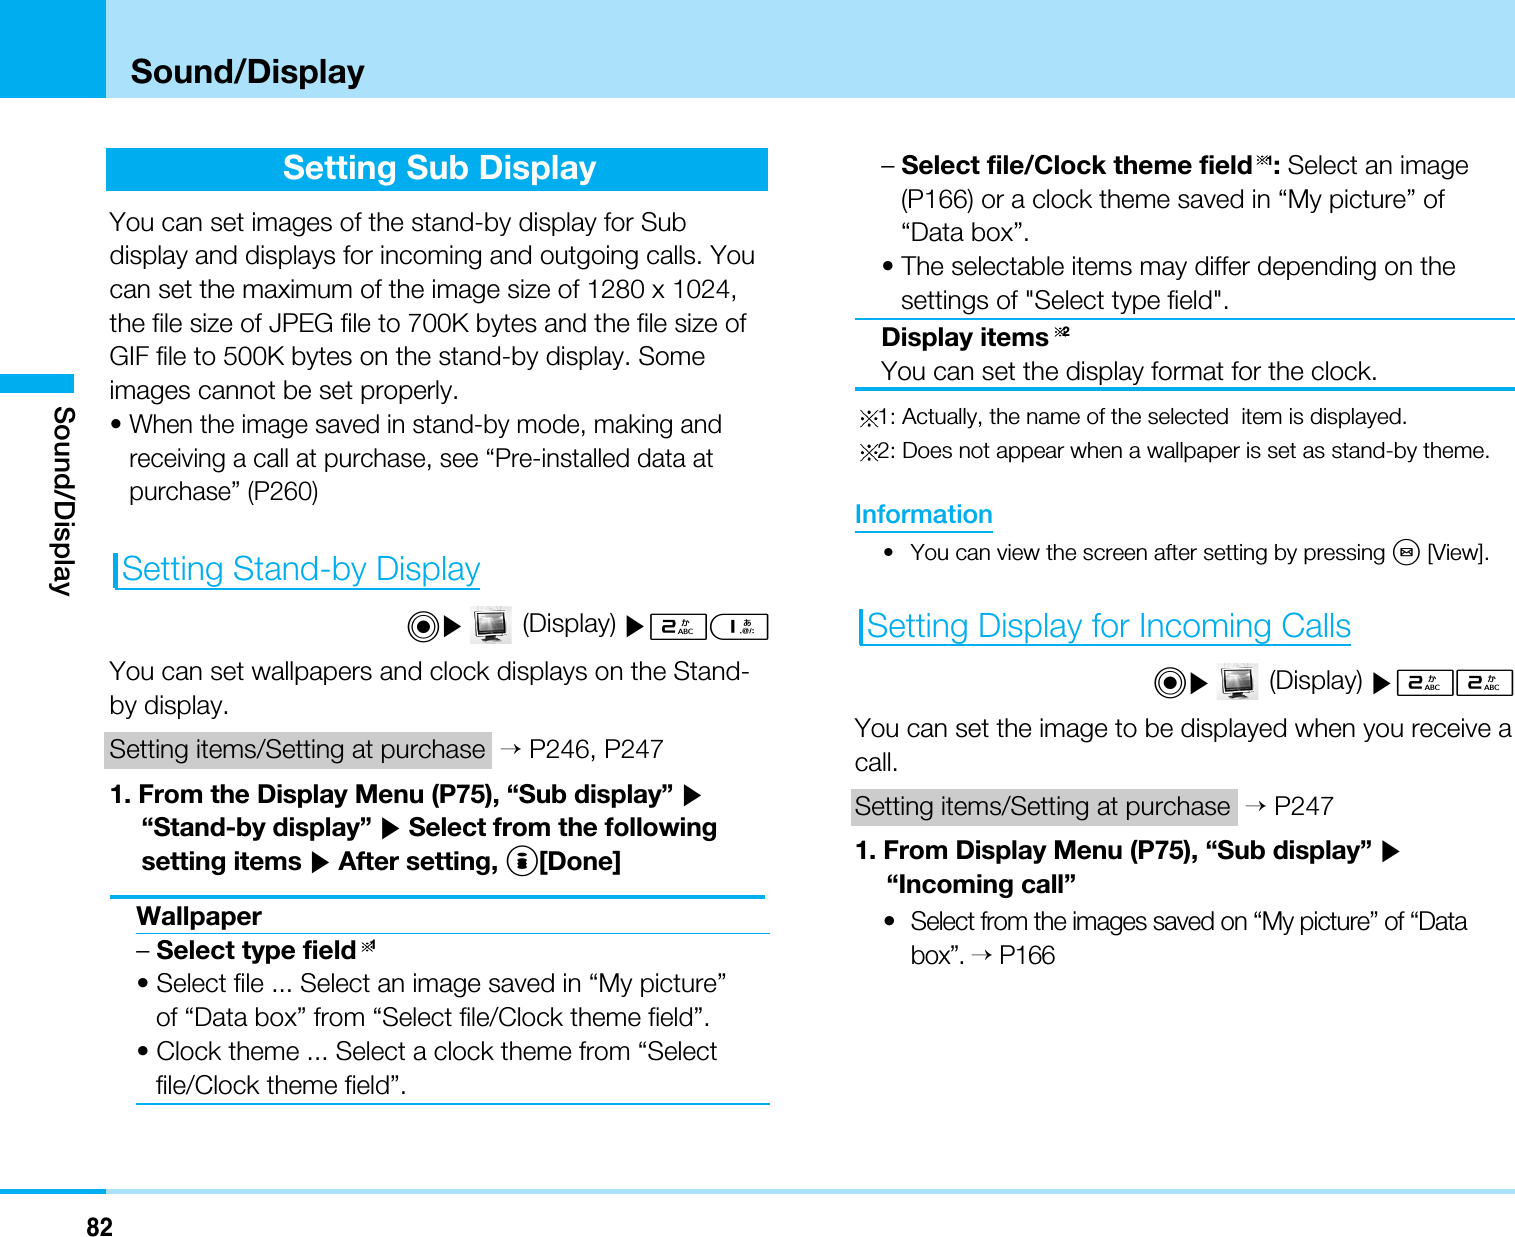 82Sound/DisplaySound/DisplaySetting Sub DisplayYou can set images of the stand-by display for Subdisplay and displays for incoming and outgoing calls. Youcan set the maximum of the image size of 1280 x 1024,the file size of JPEG file to 700K bytes and the file size ofGIF file to 500K bytes on the stand-by display. Someimages cannot be set properly.• When the image saved in stand-by mode, making andreceiving a call at purchase, see “Pre-installed data atpurchase” (P260)Setting Stand-by DisplayC](Display) ]21You can set wallpapers and clock displays on the Stand-by display.Setting items/Setting at purchase &gt;P246, P2471. From the Display Menu (P75), “Sub display” ]“Stand-by display” ]Select from the followingsetting items ]After setting, I[Done]Wallpaper–Select type field 1• Select file ... Select an image saved in “My picture”of “Data box” from “Select file/Clock theme field”.• Clock theme ... Select a clock theme from “Selectfile/Clock theme field”.–Select file/Clock theme field 1:Select an image(P166) or a clock theme saved in “My picture” of“Data box”.• The selectable items may differ depending on thesettings of &quot;Select type field&quot;.Display items 2You can set the display format for the clock.1: Actually, the name of the selected  item is displayed.2: Does not appear when a wallpaper is set as stand-by theme.Information• You can view the screen after setting by pressing M[View].Setting Display for Incoming CallsC](Display) ]22You can set the image to be displayed when you receive acall.Setting items/Setting at purchase &gt;P2471. From Display Menu (P75), “Sub display” ]“Incoming call”•Select from the images saved on “My picture” of “Databox”.&gt;P166